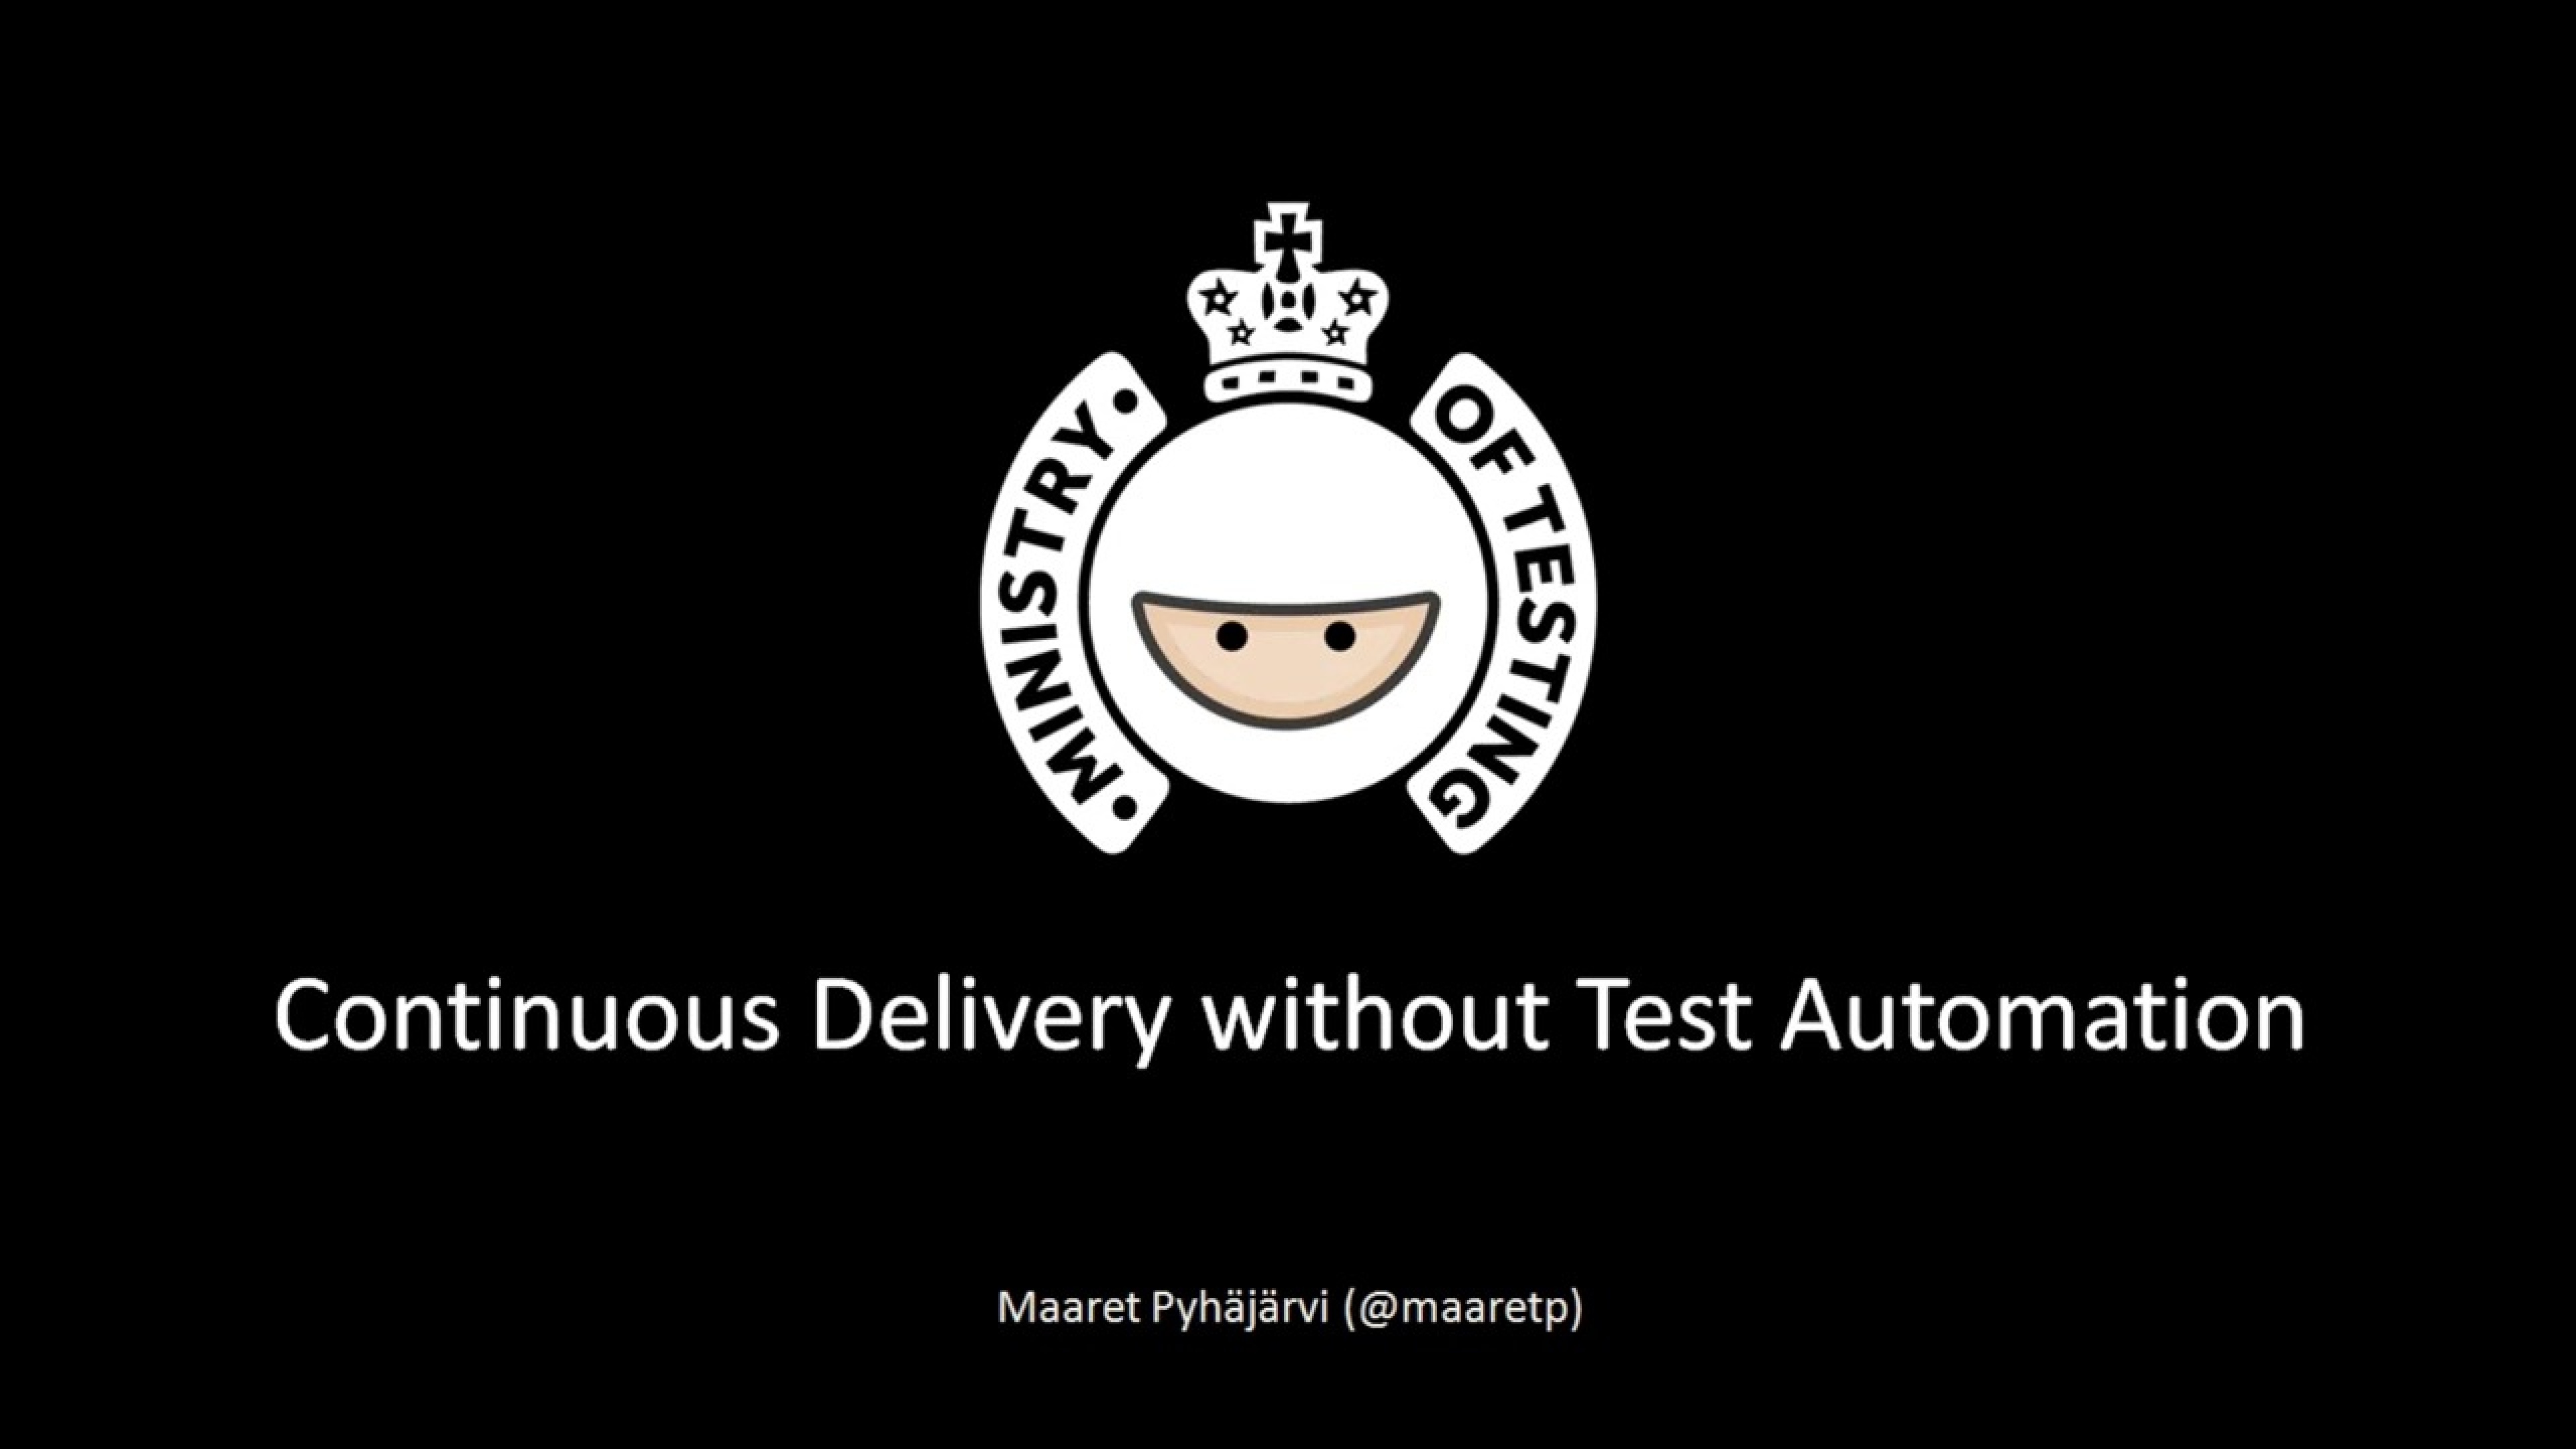 Continuous Delivery without Test Automation with Maaret Pyhäjärvi